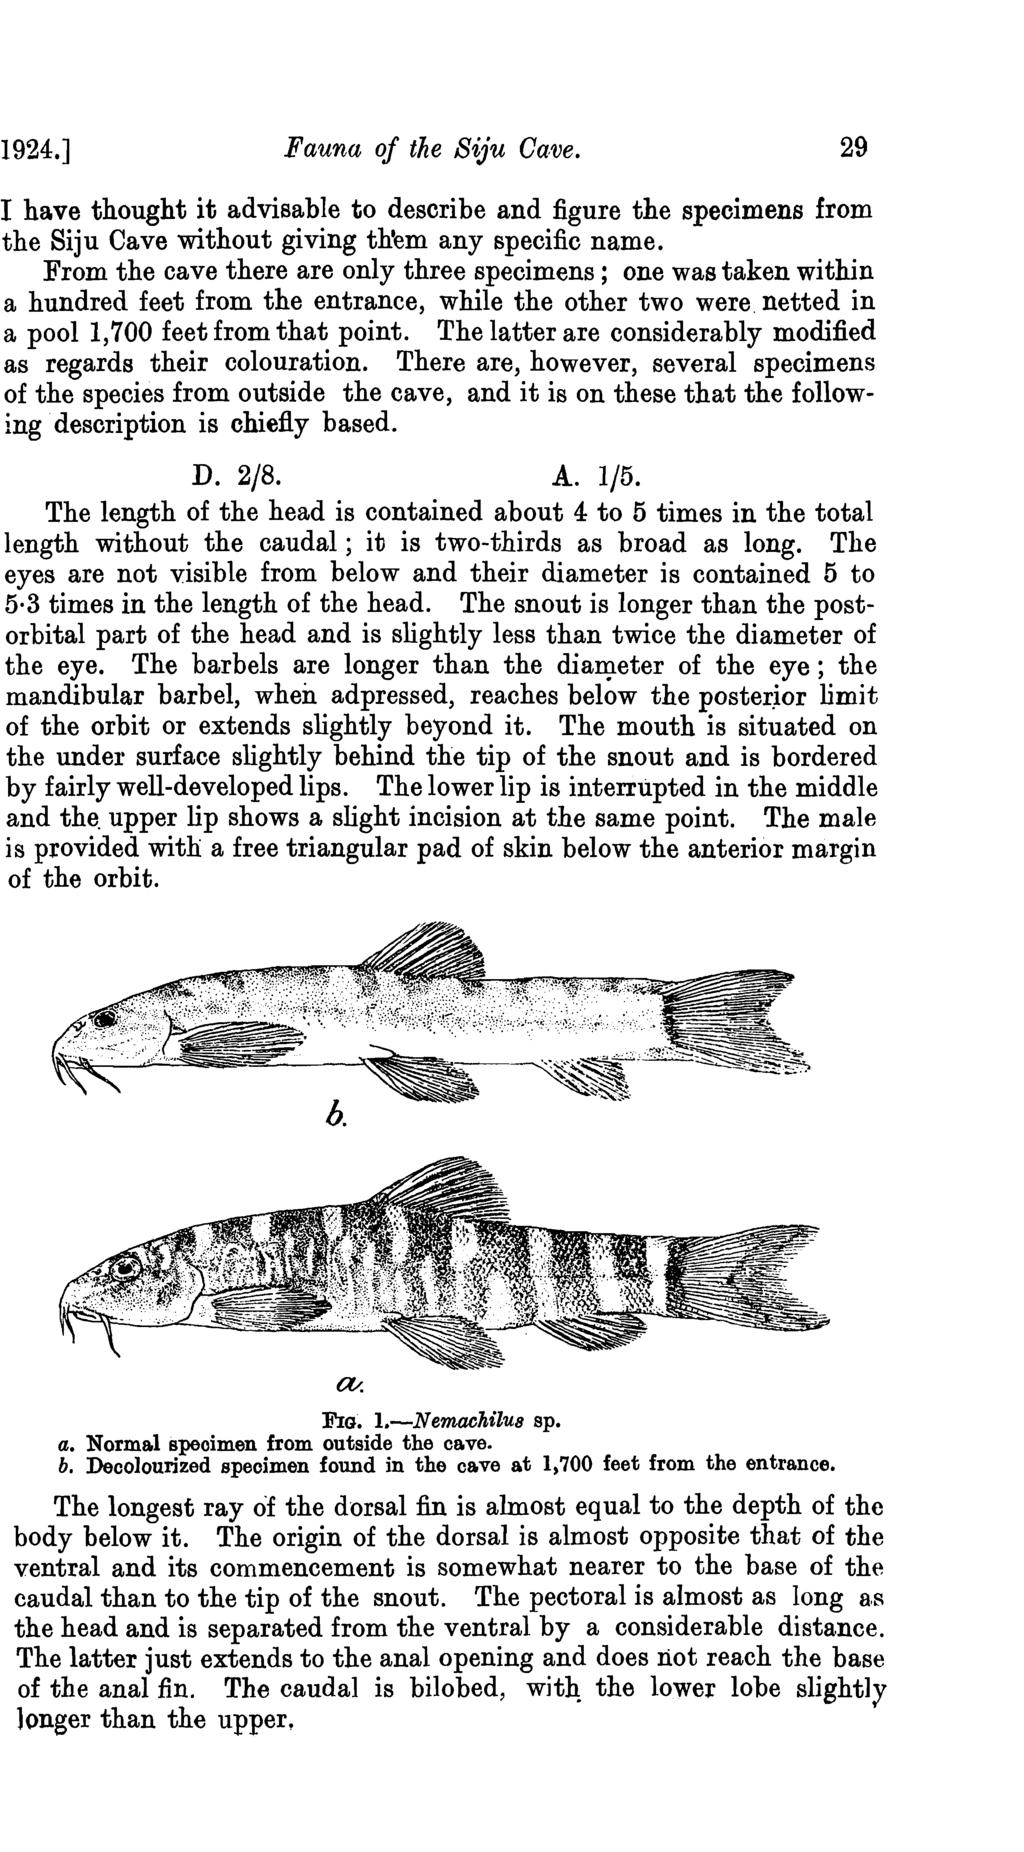 1924.] Fauna of the Siju Ga,ve. 29 I have thought it advisable to describe and figure the specimens from the Siju Cave without giving th'em any specific name.